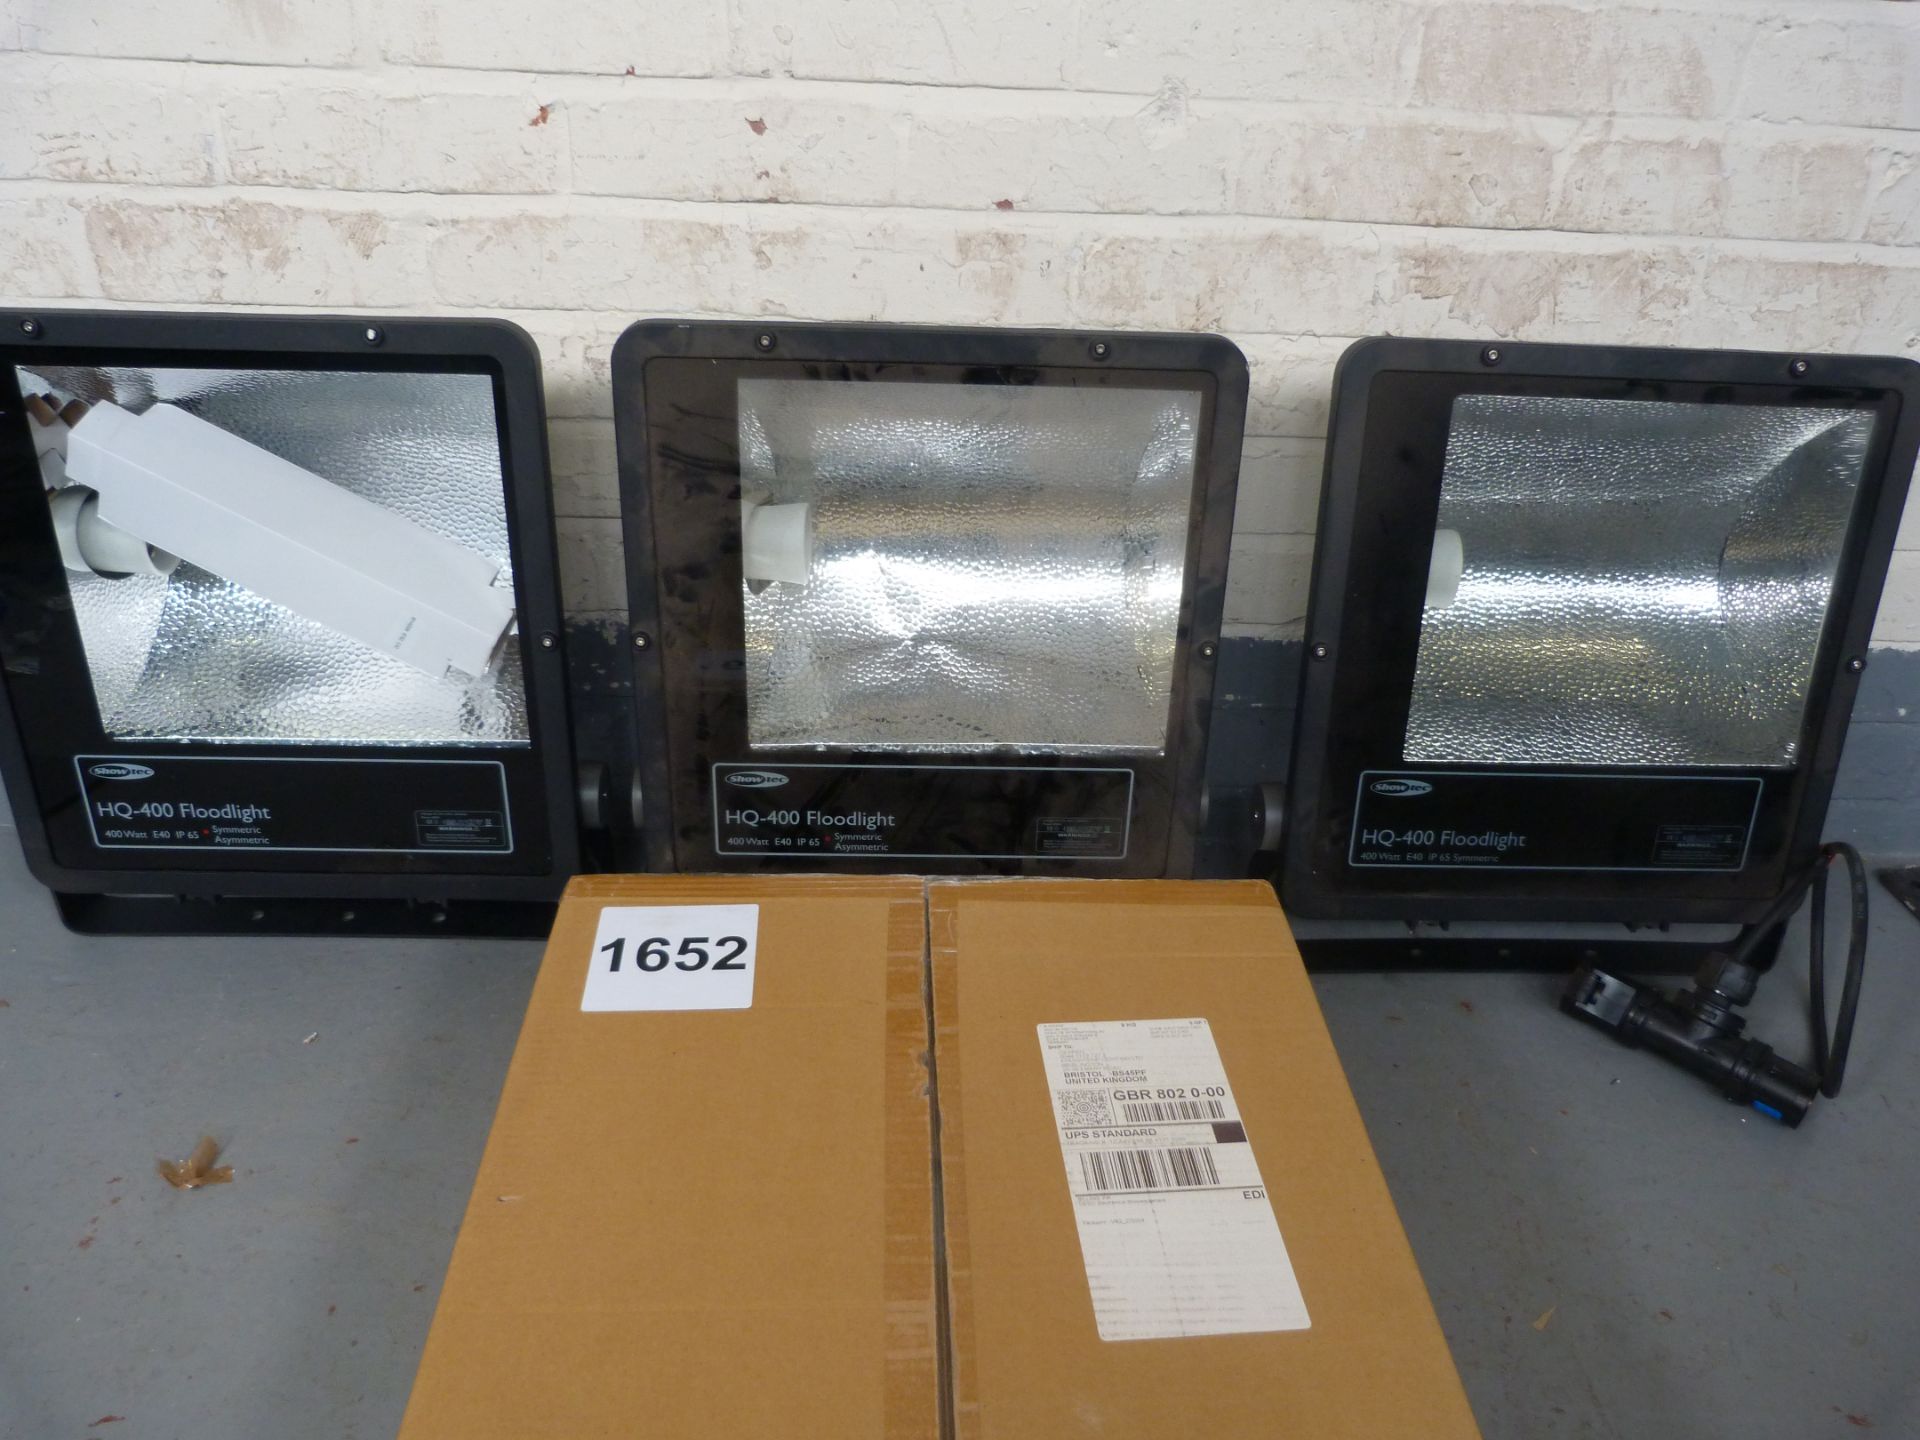 4 x HQ-400 FloodLight (No Lamps) IP65 400w E40. In Cardboard. New